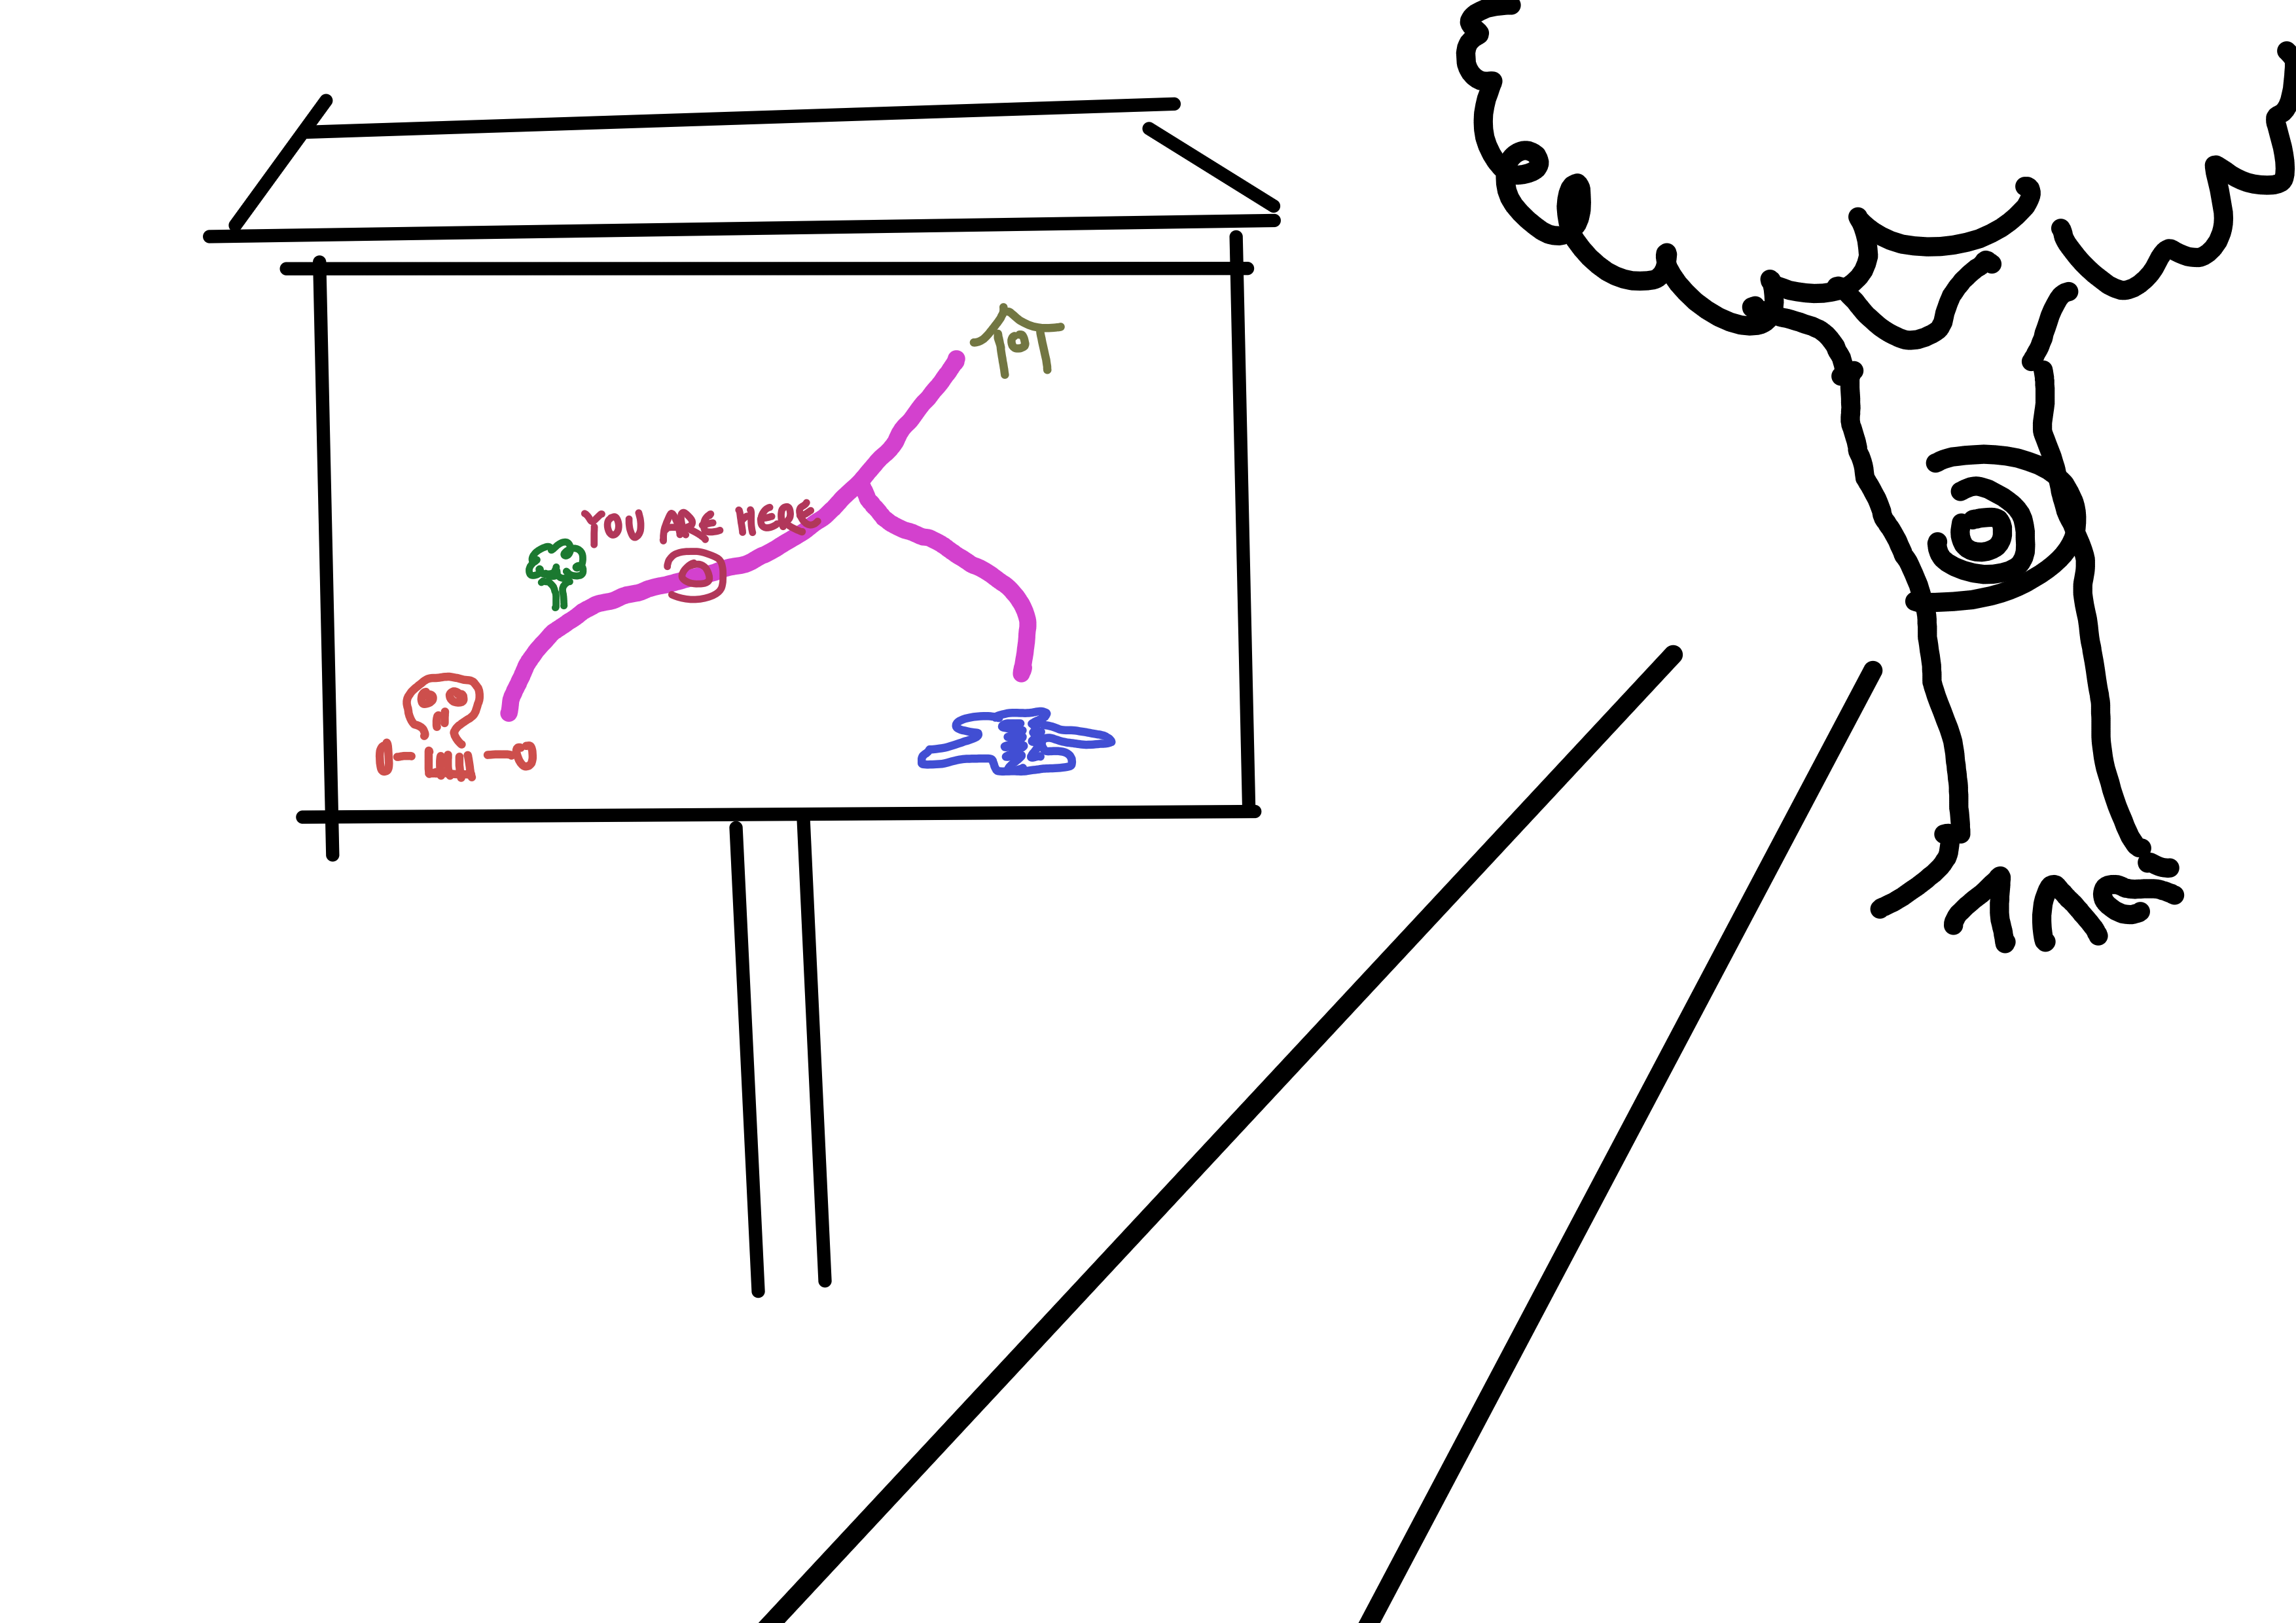 A sketch showing a straight trail with a map to the left and a tree to the right a little into the distance. The map shows two trails in a T-shape. The following icons are at the end of the trails: house, lake, skull. There is also a you-are-here marking on the trail, on the leg between the skull and the T-crossing. The tree to the right of the trail is also marked on the map, a bit towards the skull as measured from the YAH point.